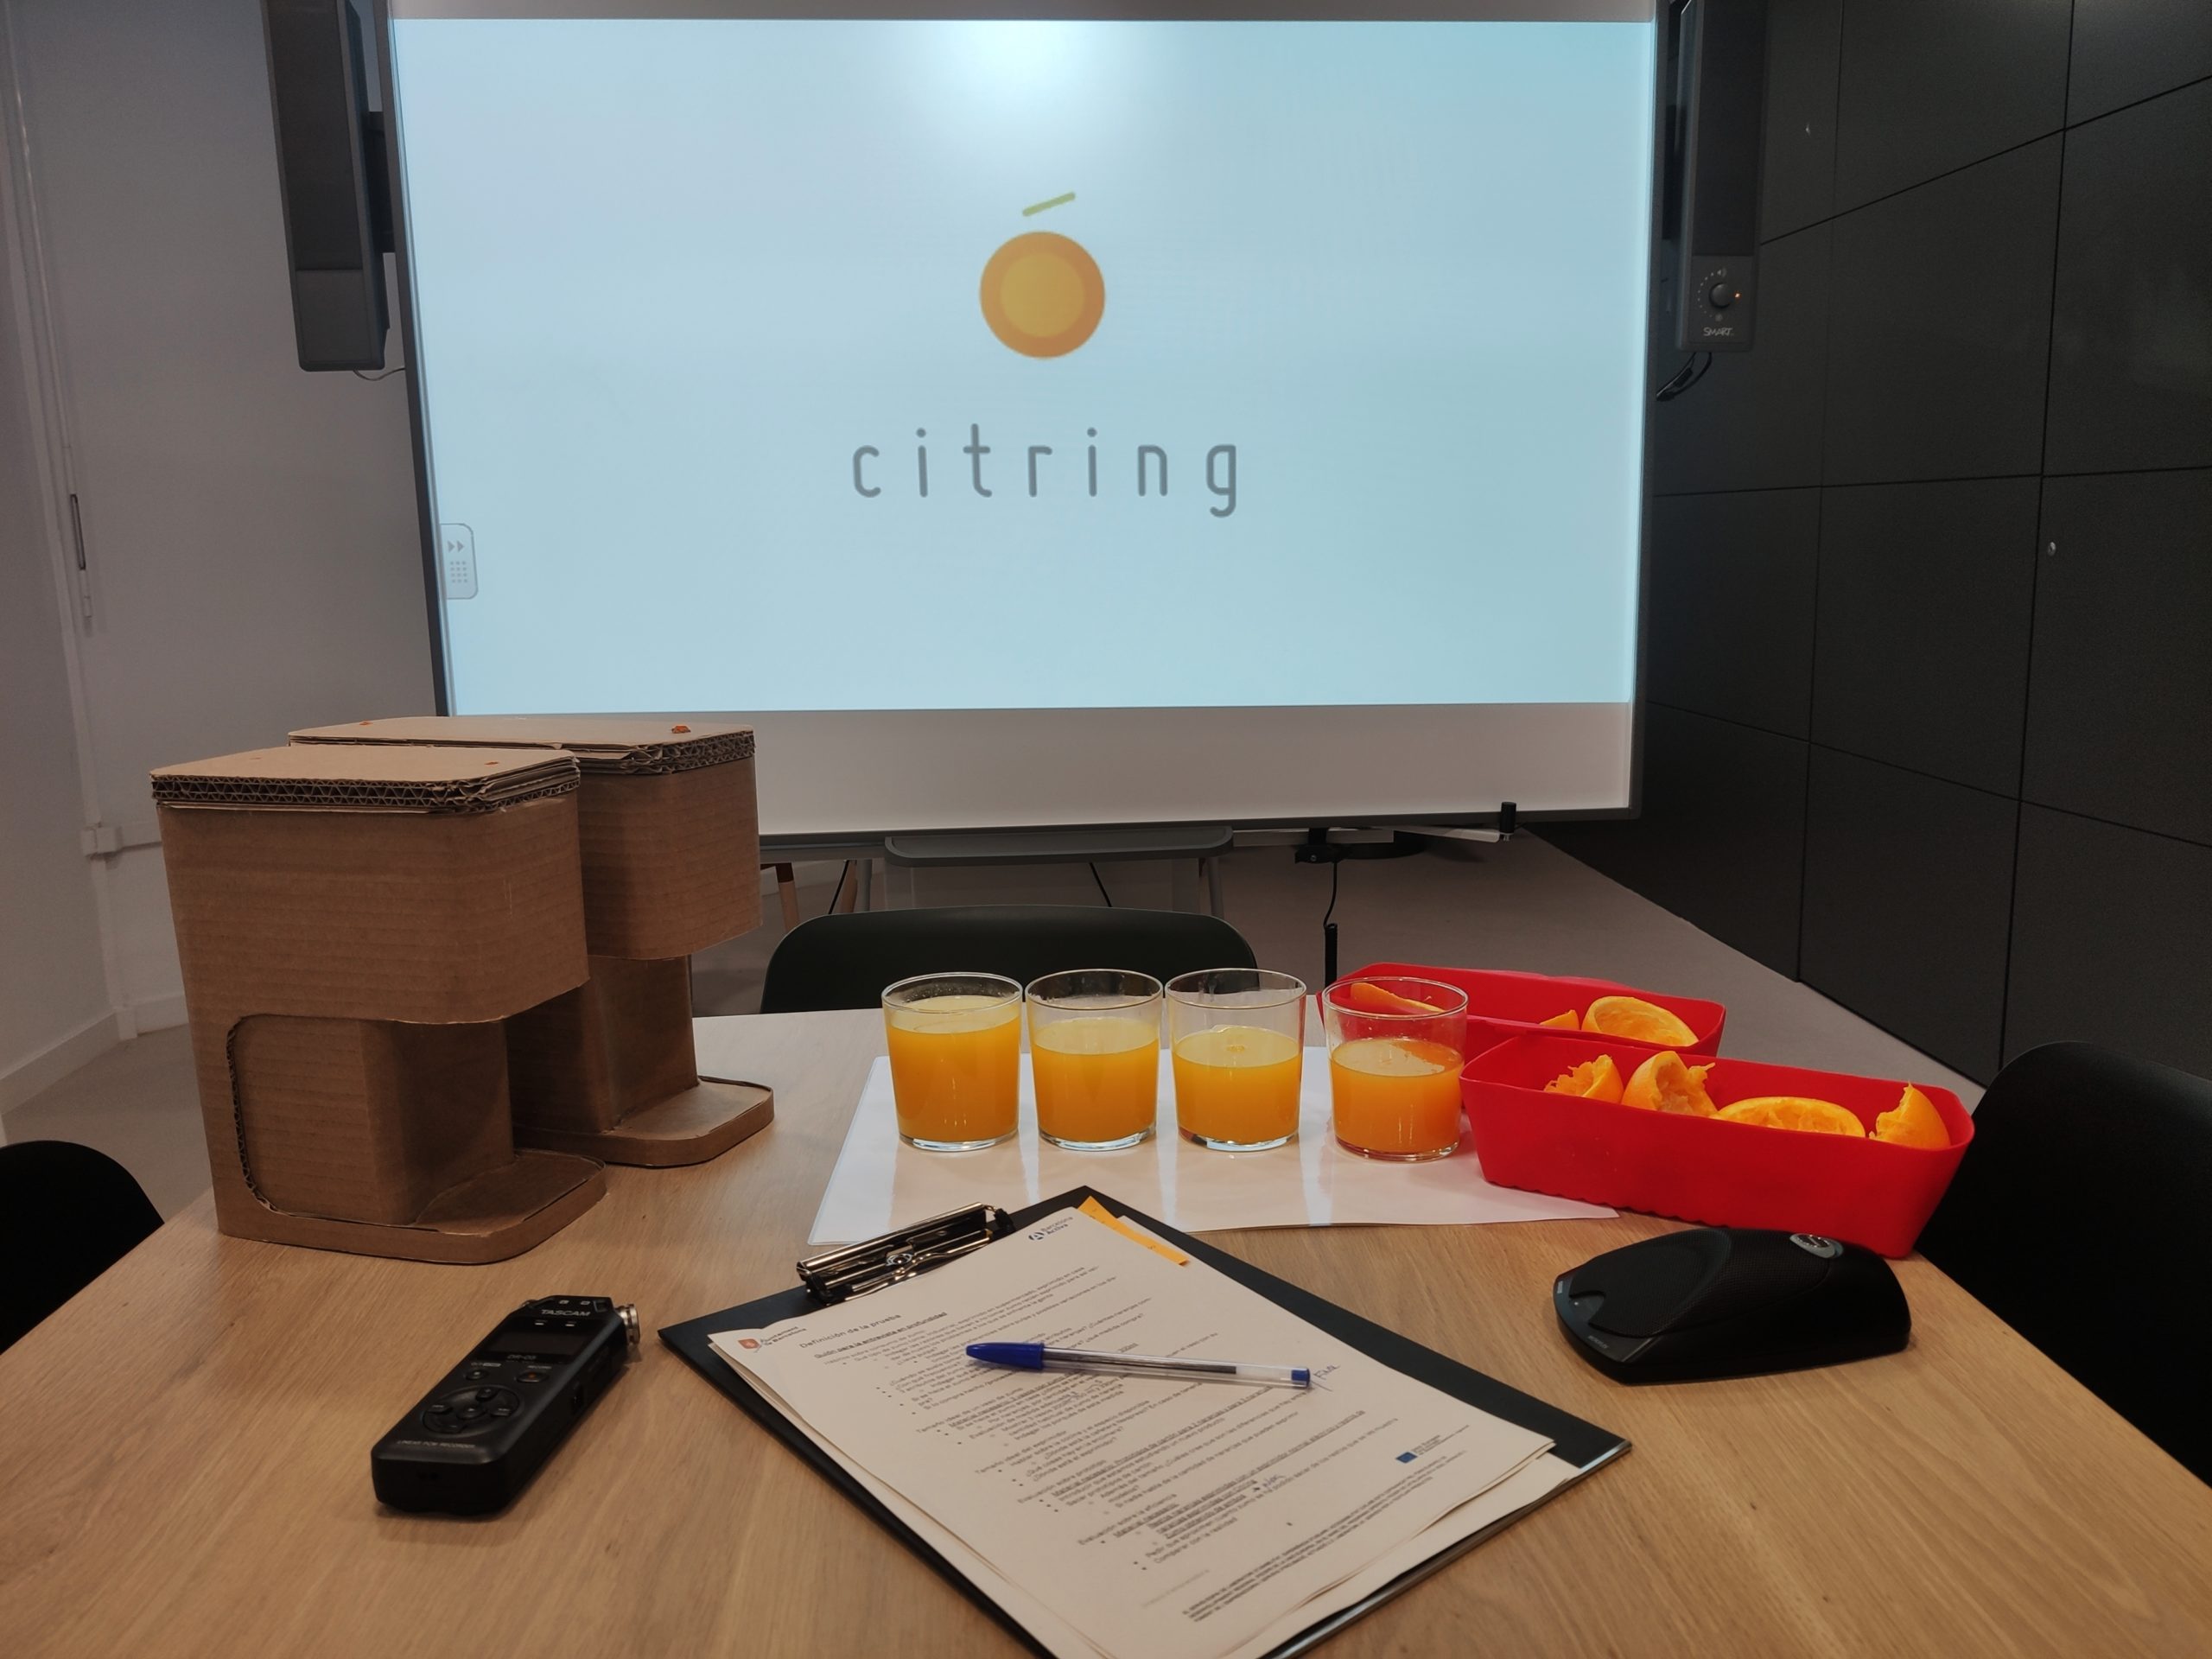 Image shows, two prototypes, a screen, 4 orange juices, orange pieces, a recorder and script